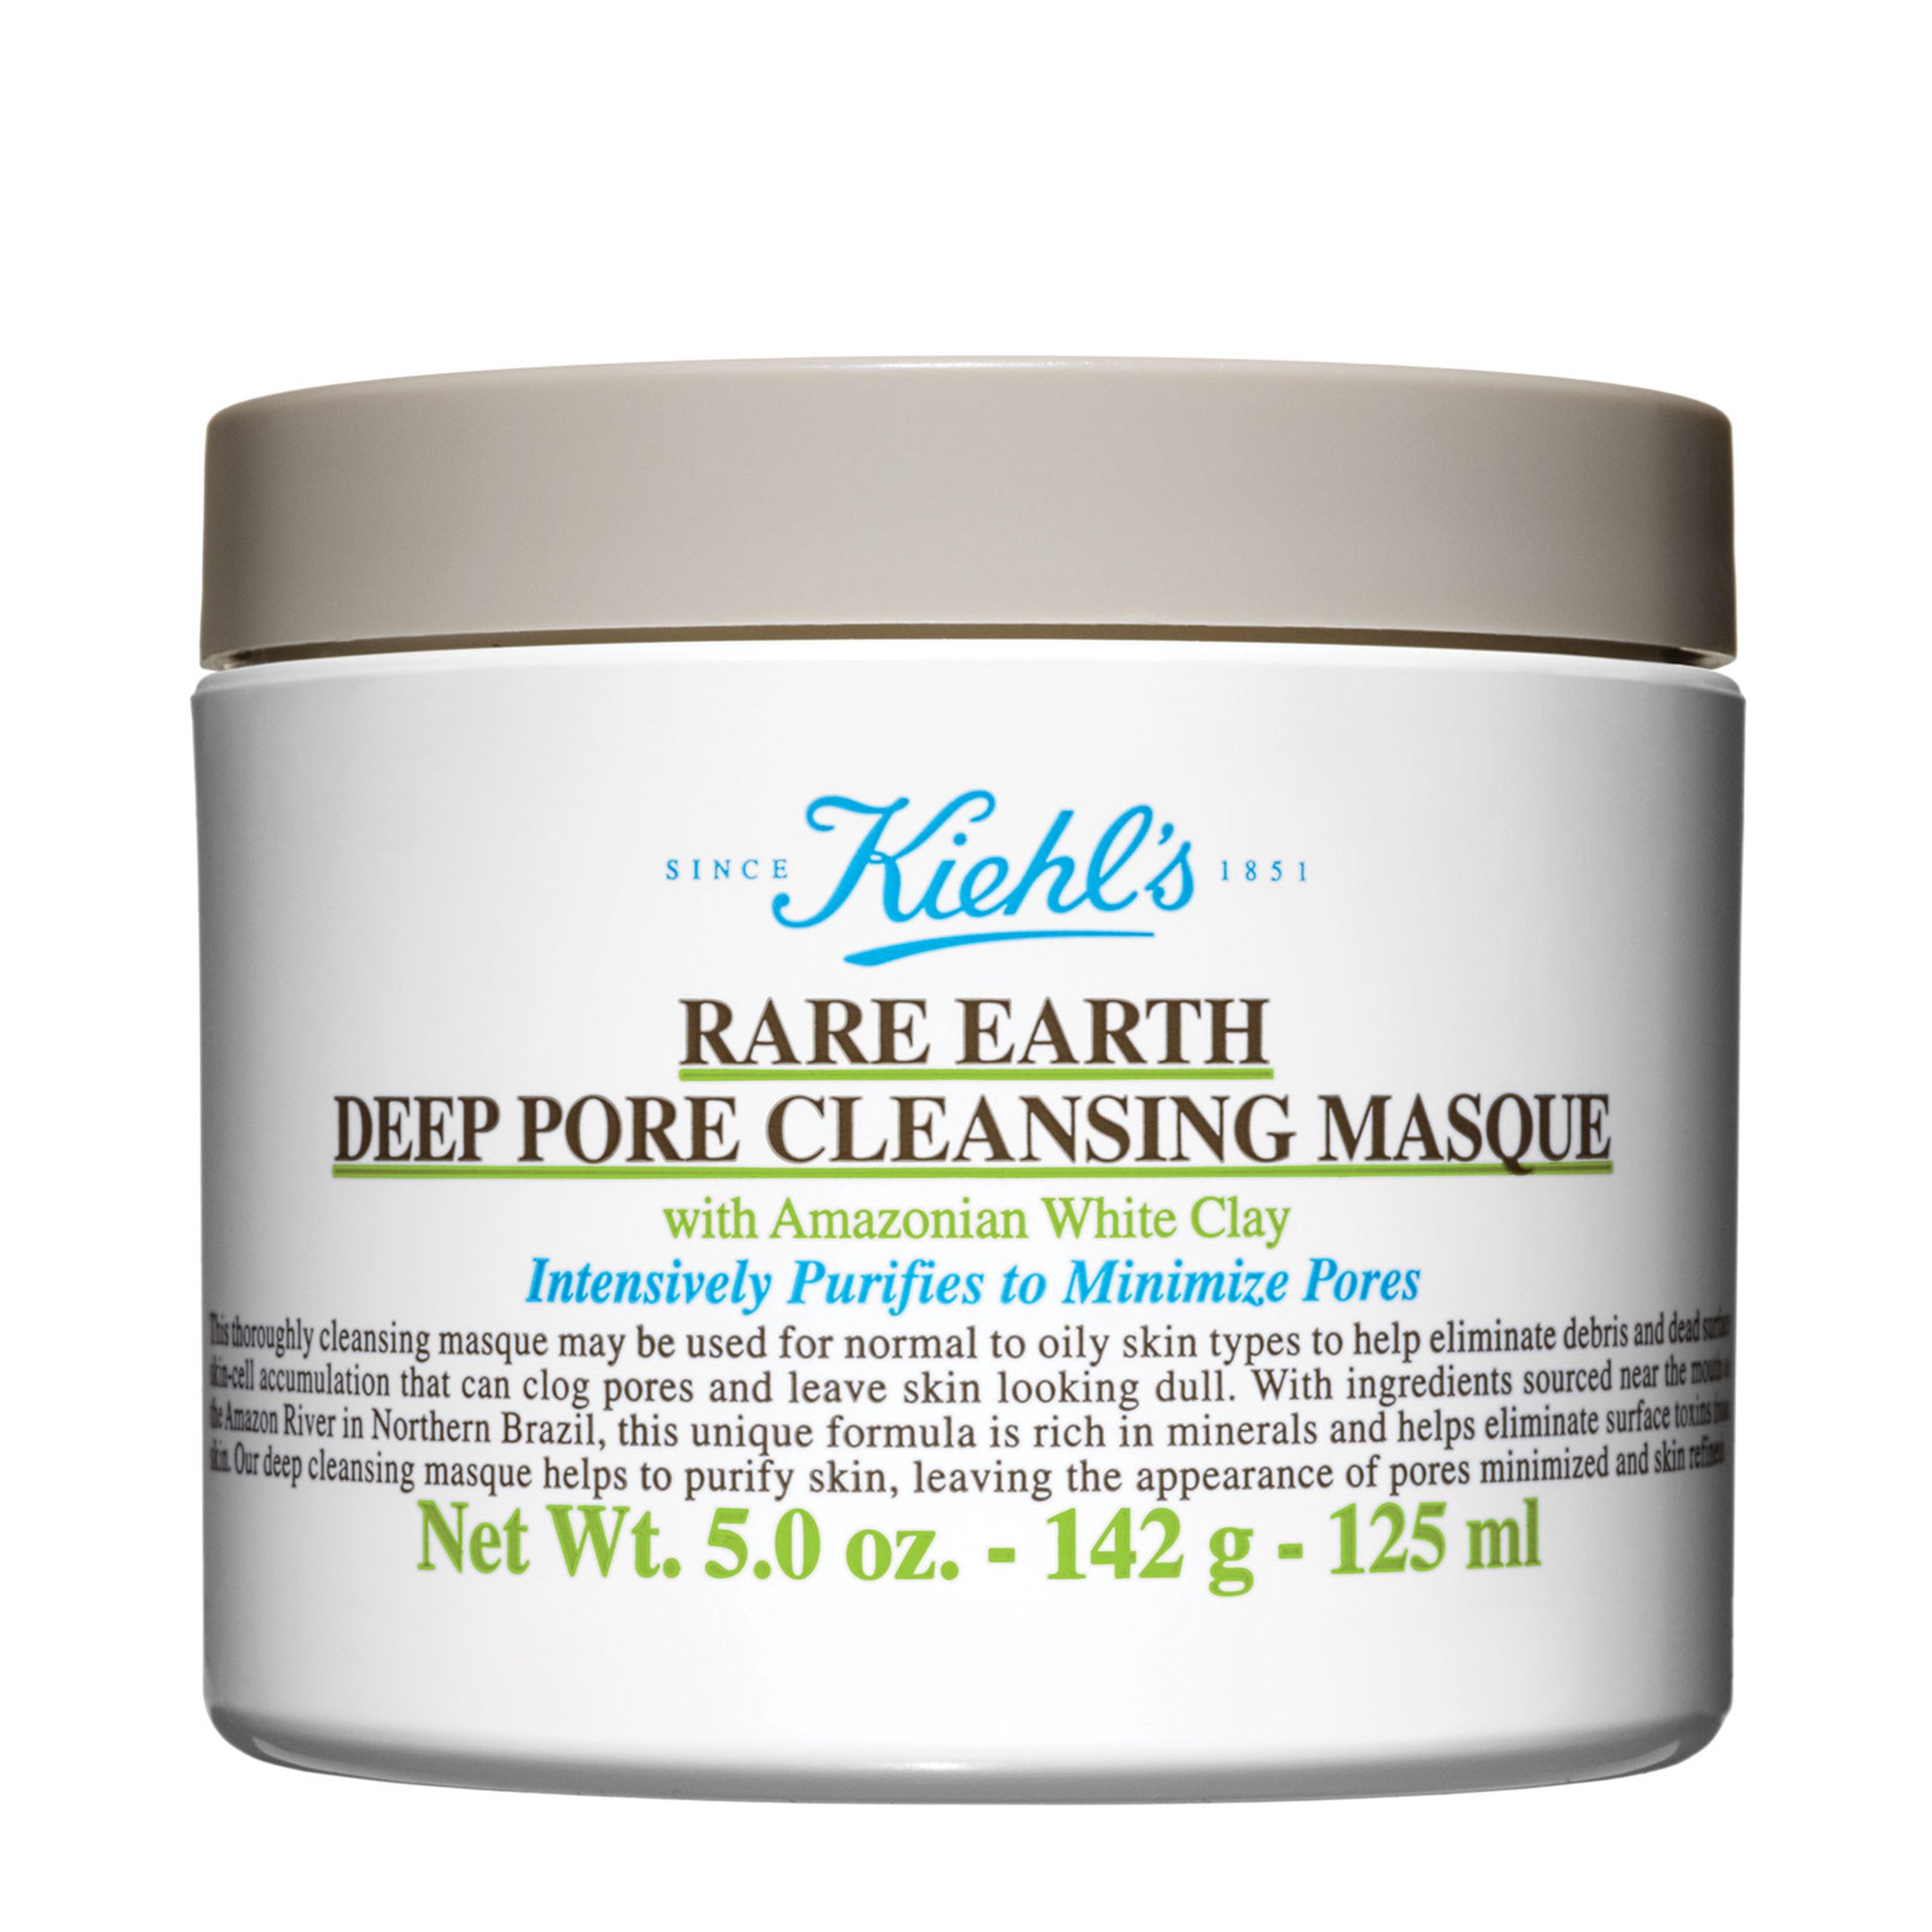 Mặt Nạ Kiehl’s Rare Earth Deep Pore Cleansing